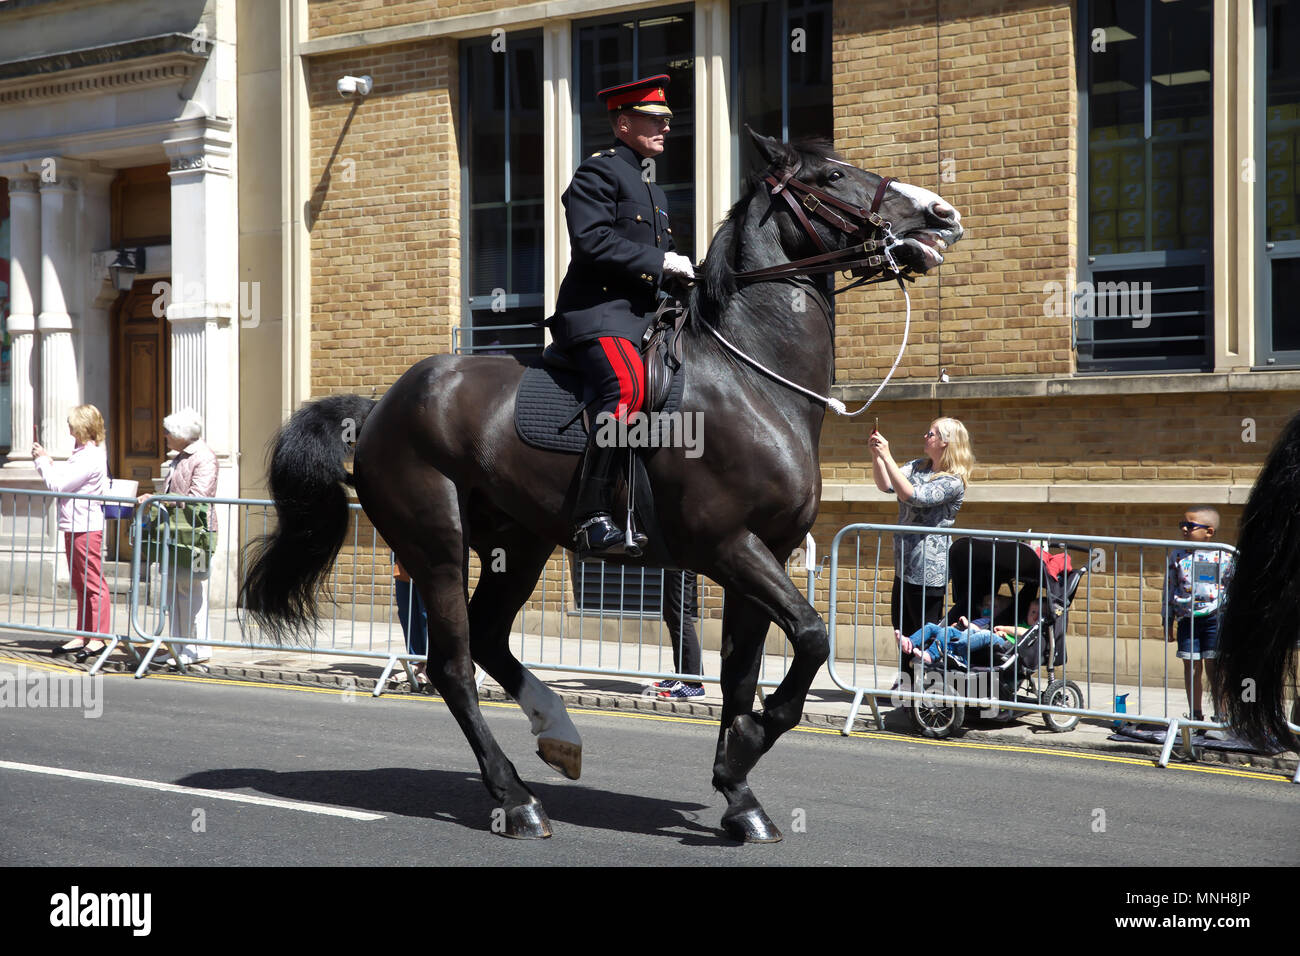 Windsor,UK,17th May 2018,The Royal Wedding Rehearsal in Windsor takes place ahead of the marriage on Saturday of Prince Harry to Meghan Markle. The Ascot Landau carriage left Windsor castle to Process around the Town. The carriage was surrounded by members of the Household Cavalry.Credit Keith Larby/Alamy Live News Stock Photo